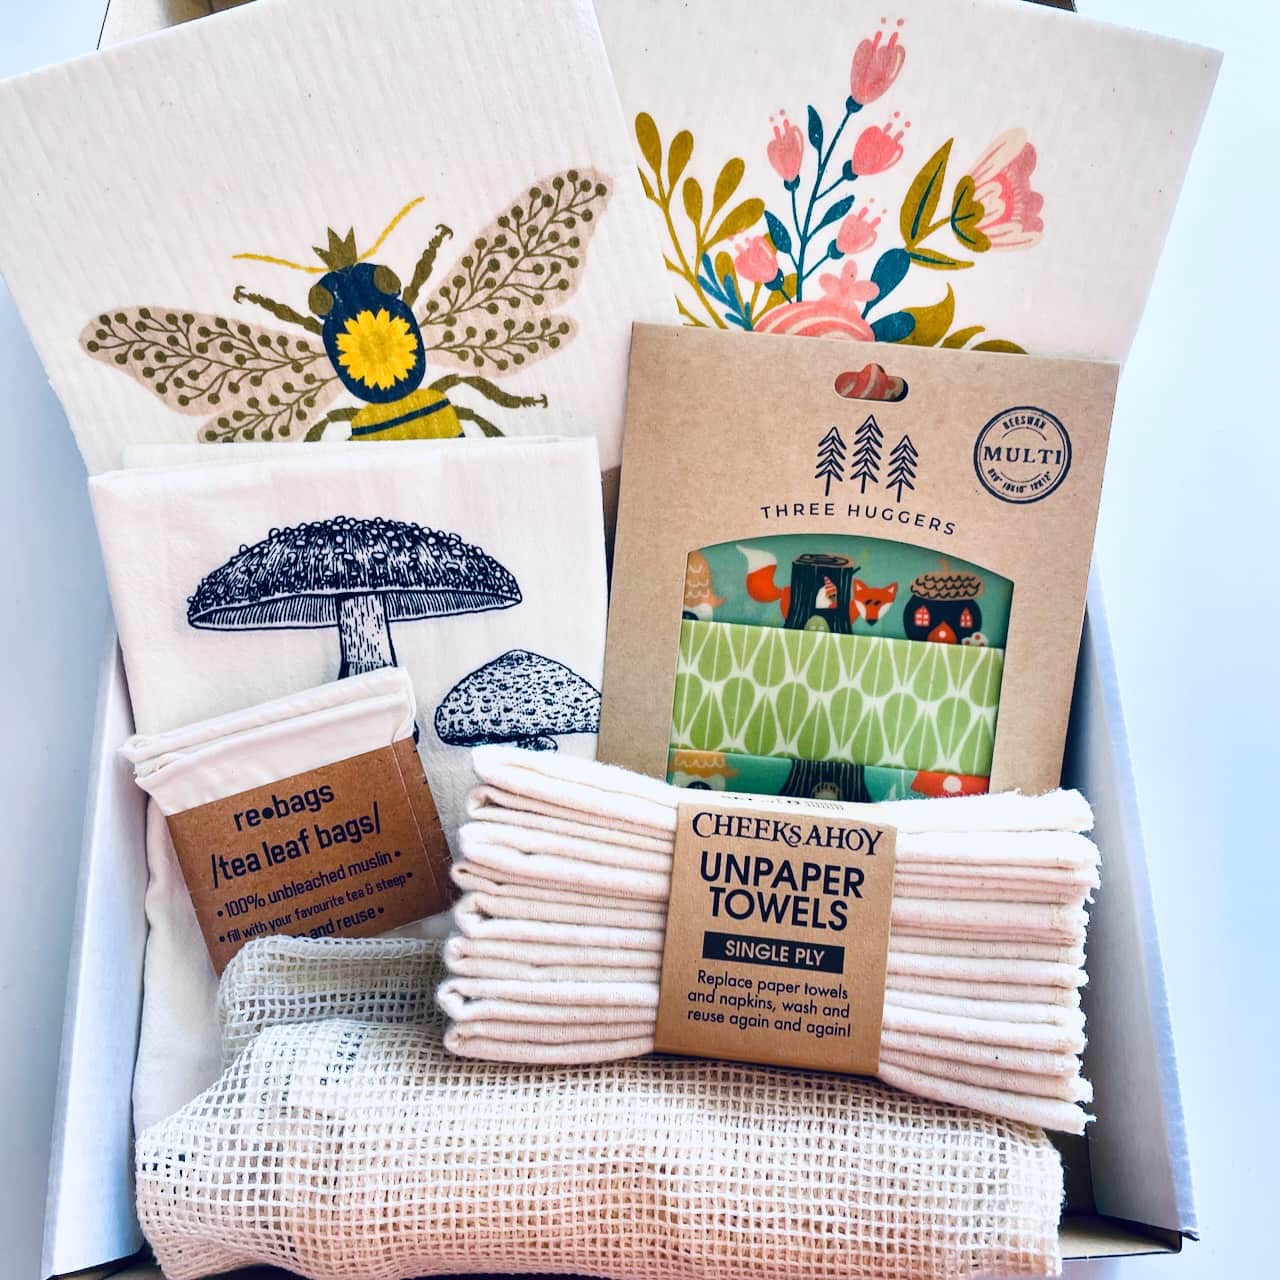 Sustainable Organic Cotton Towels - Going Zero Waste